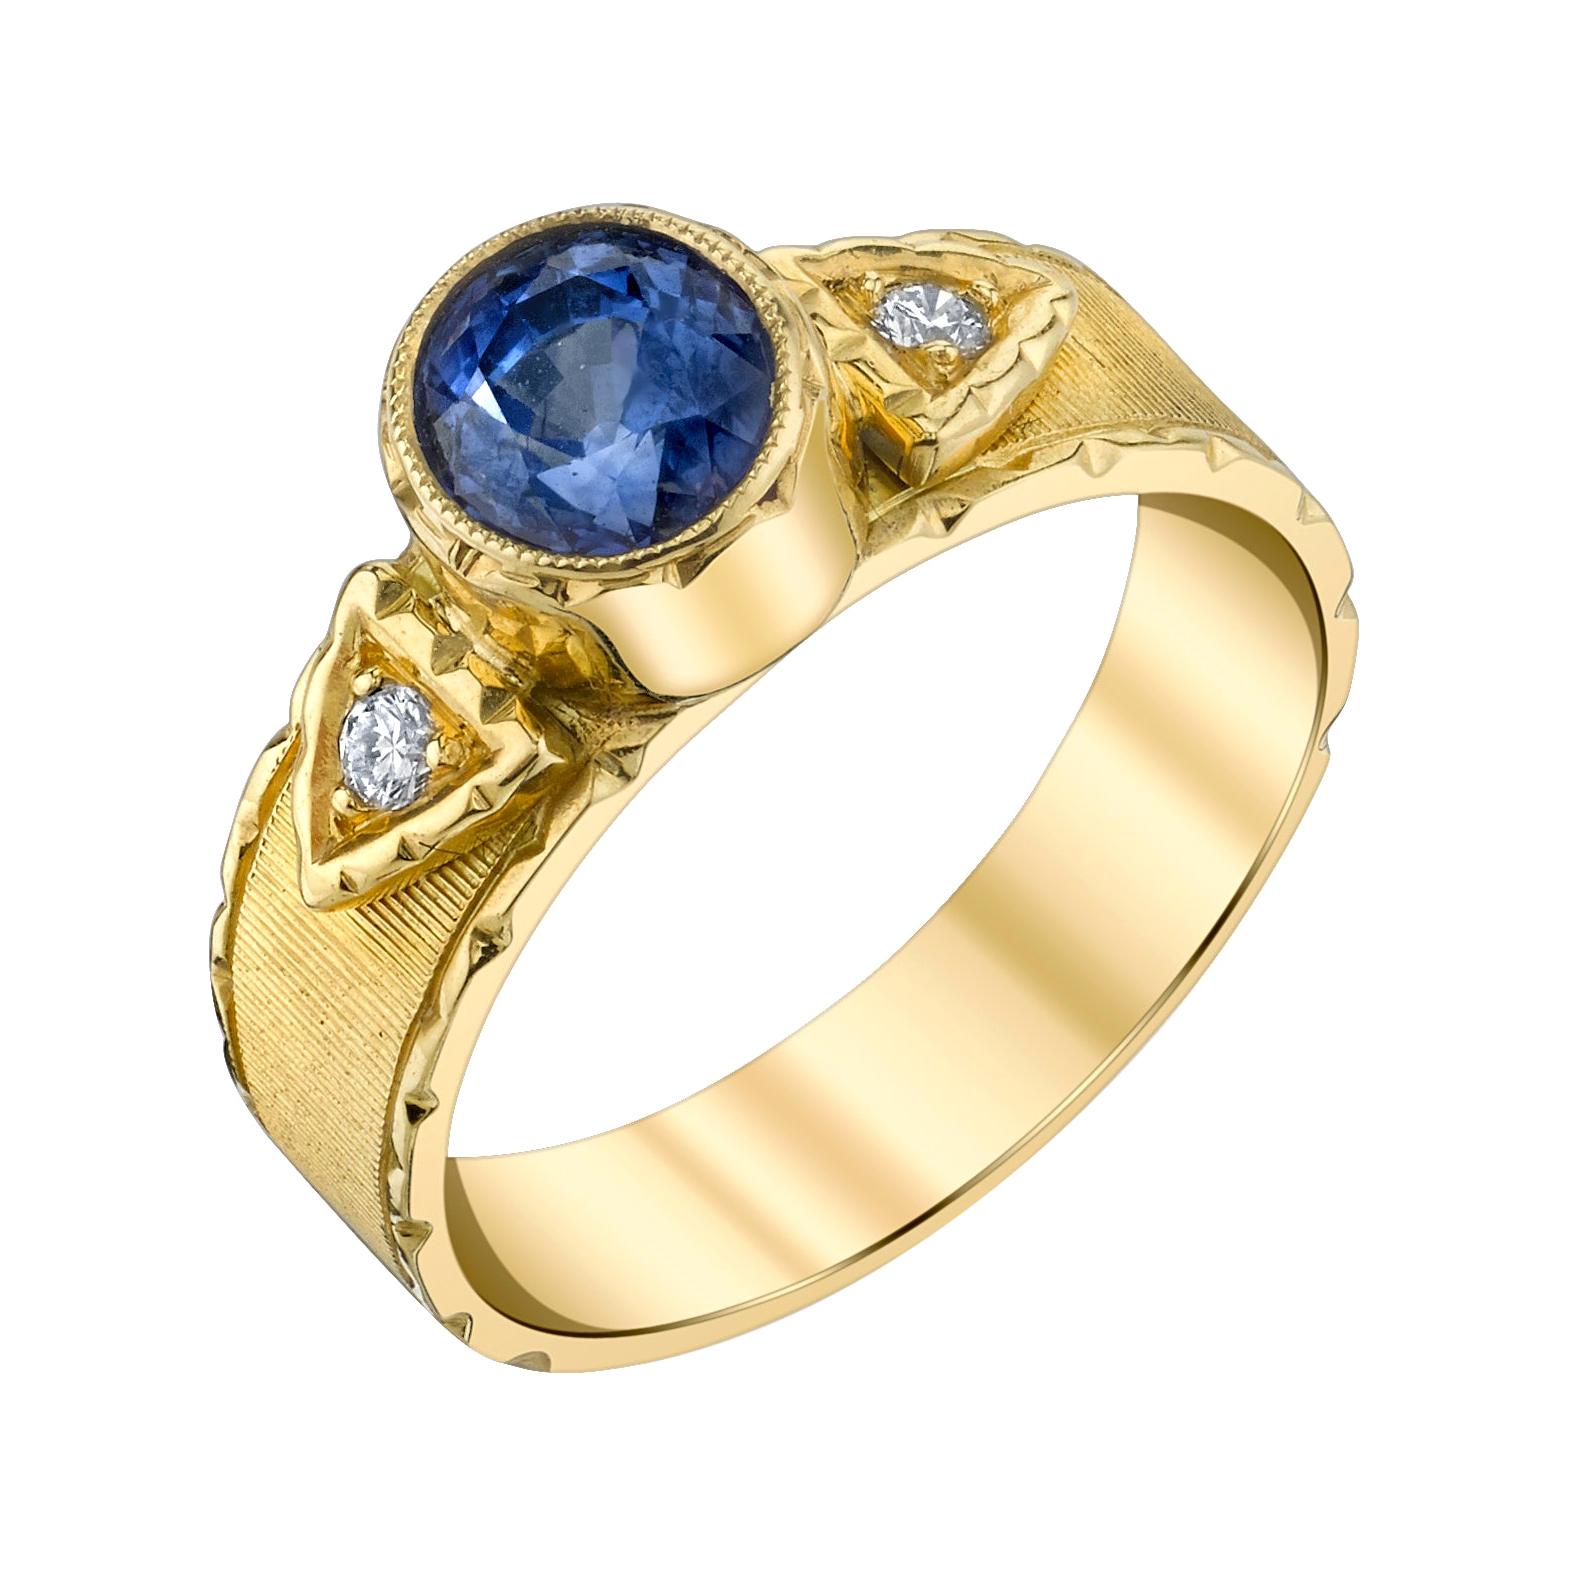 1.58 Carat Blue Sapphire and Diamond Hand-Engraved Band Ring in 18k Yellow Gold 